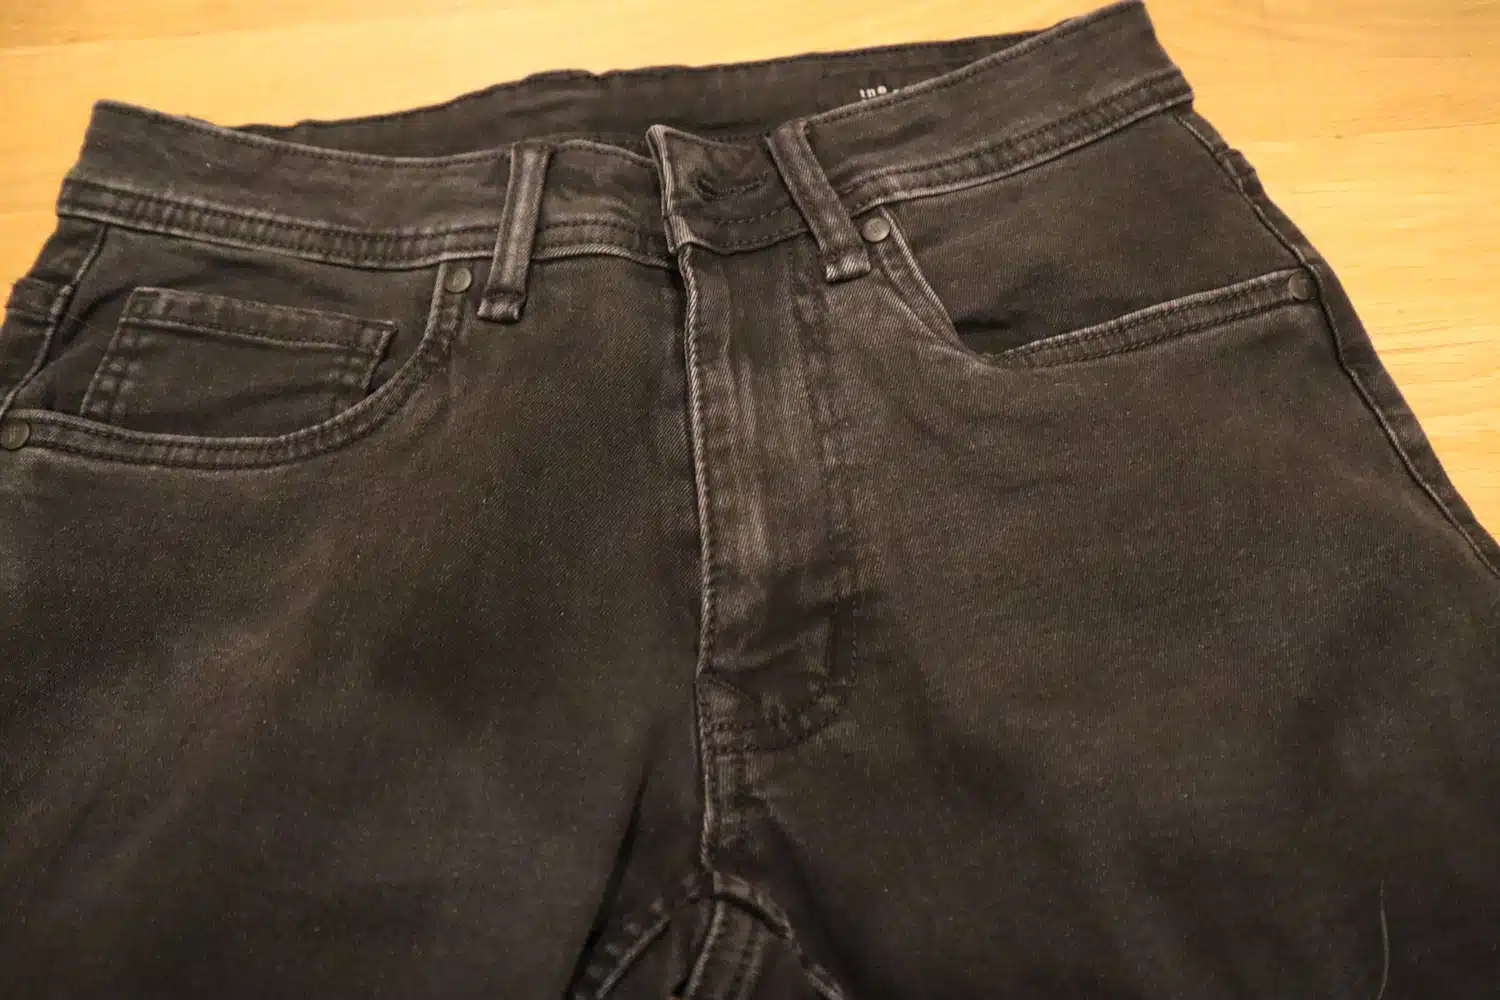 I Discovered The PERFECT Jeans - Stretchy Jeans Tested 